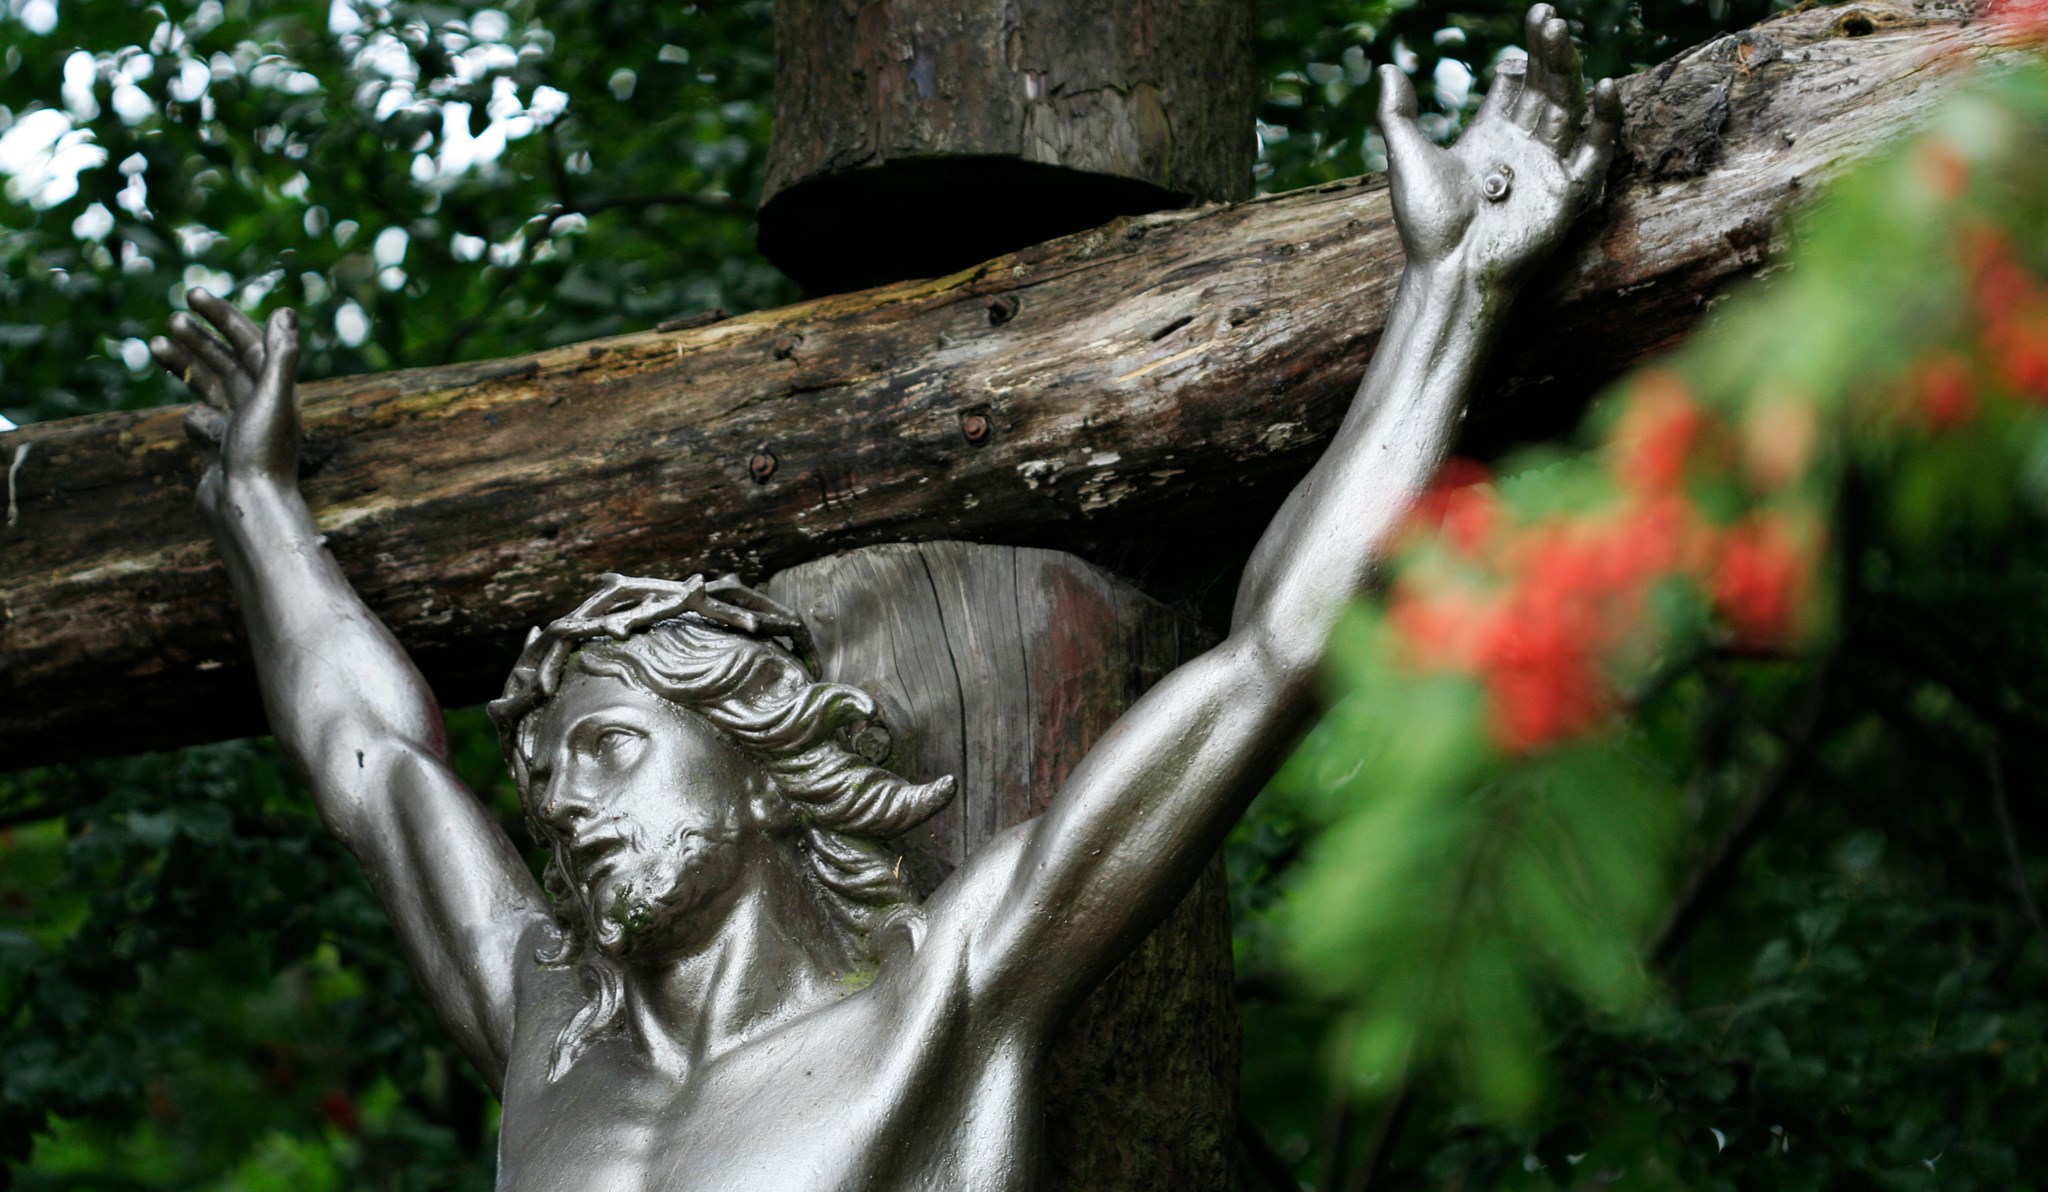 statue of jesus on the cross in front of a holly tree